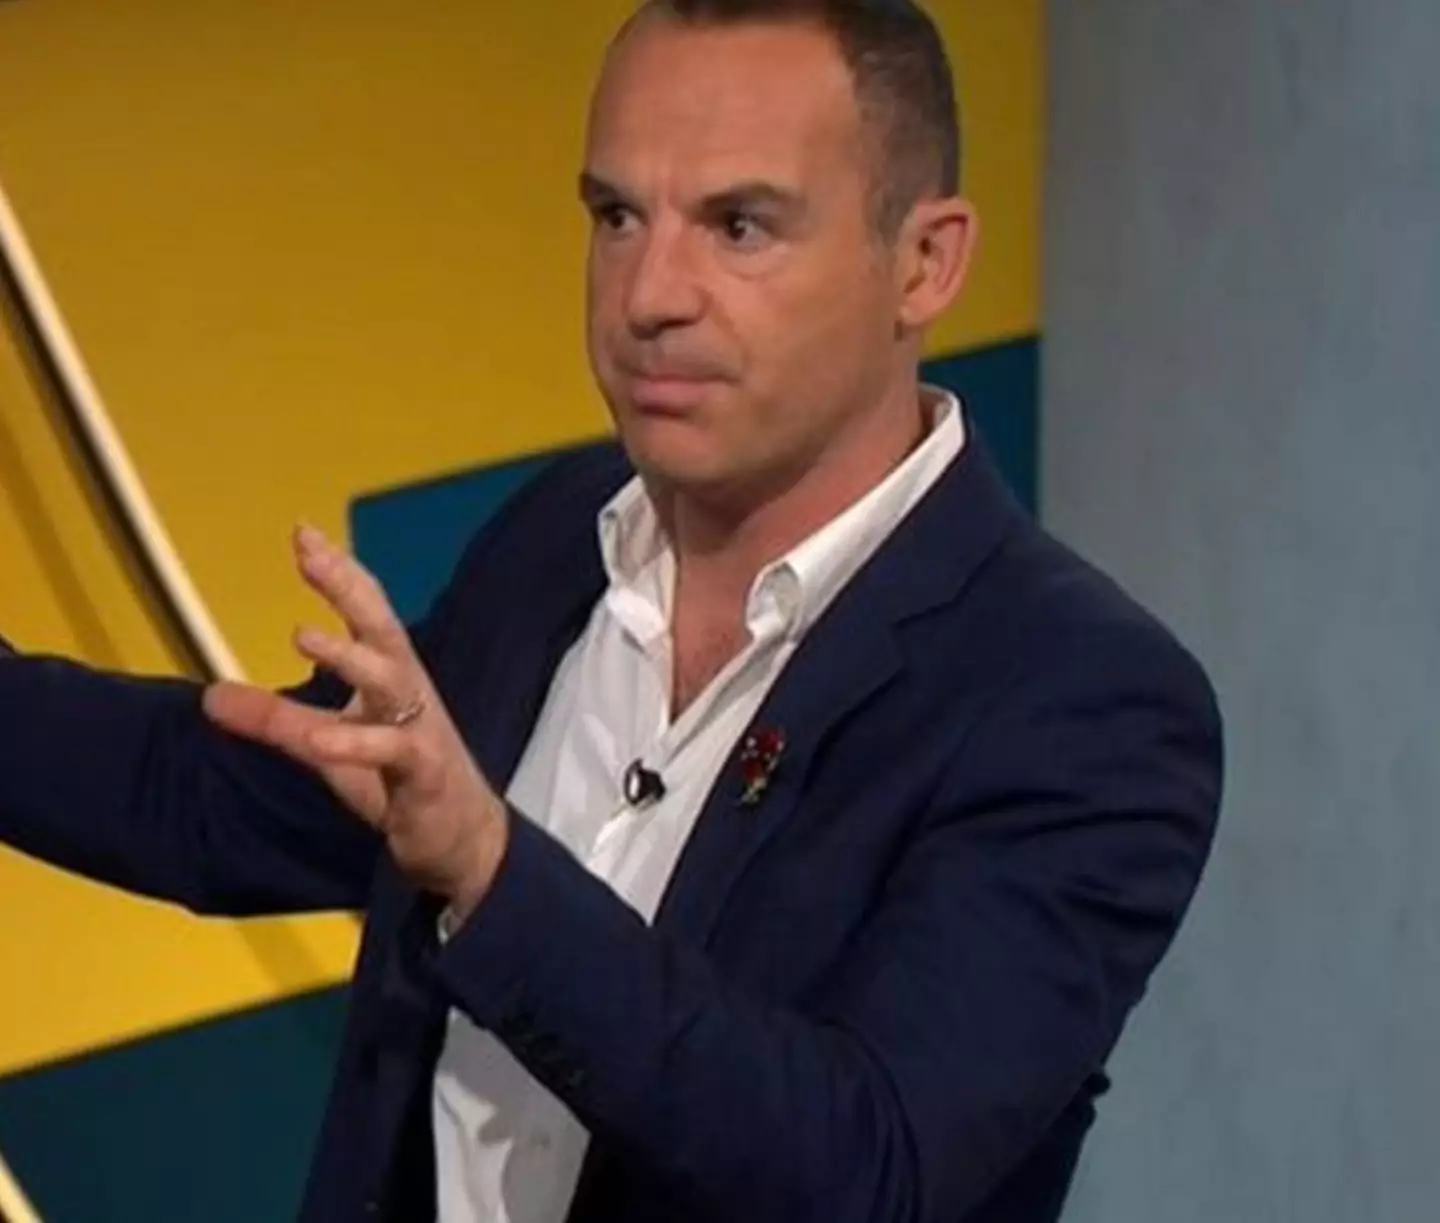 Martin Lewis says credit cards could work out cheaper than debit card overdrafts.